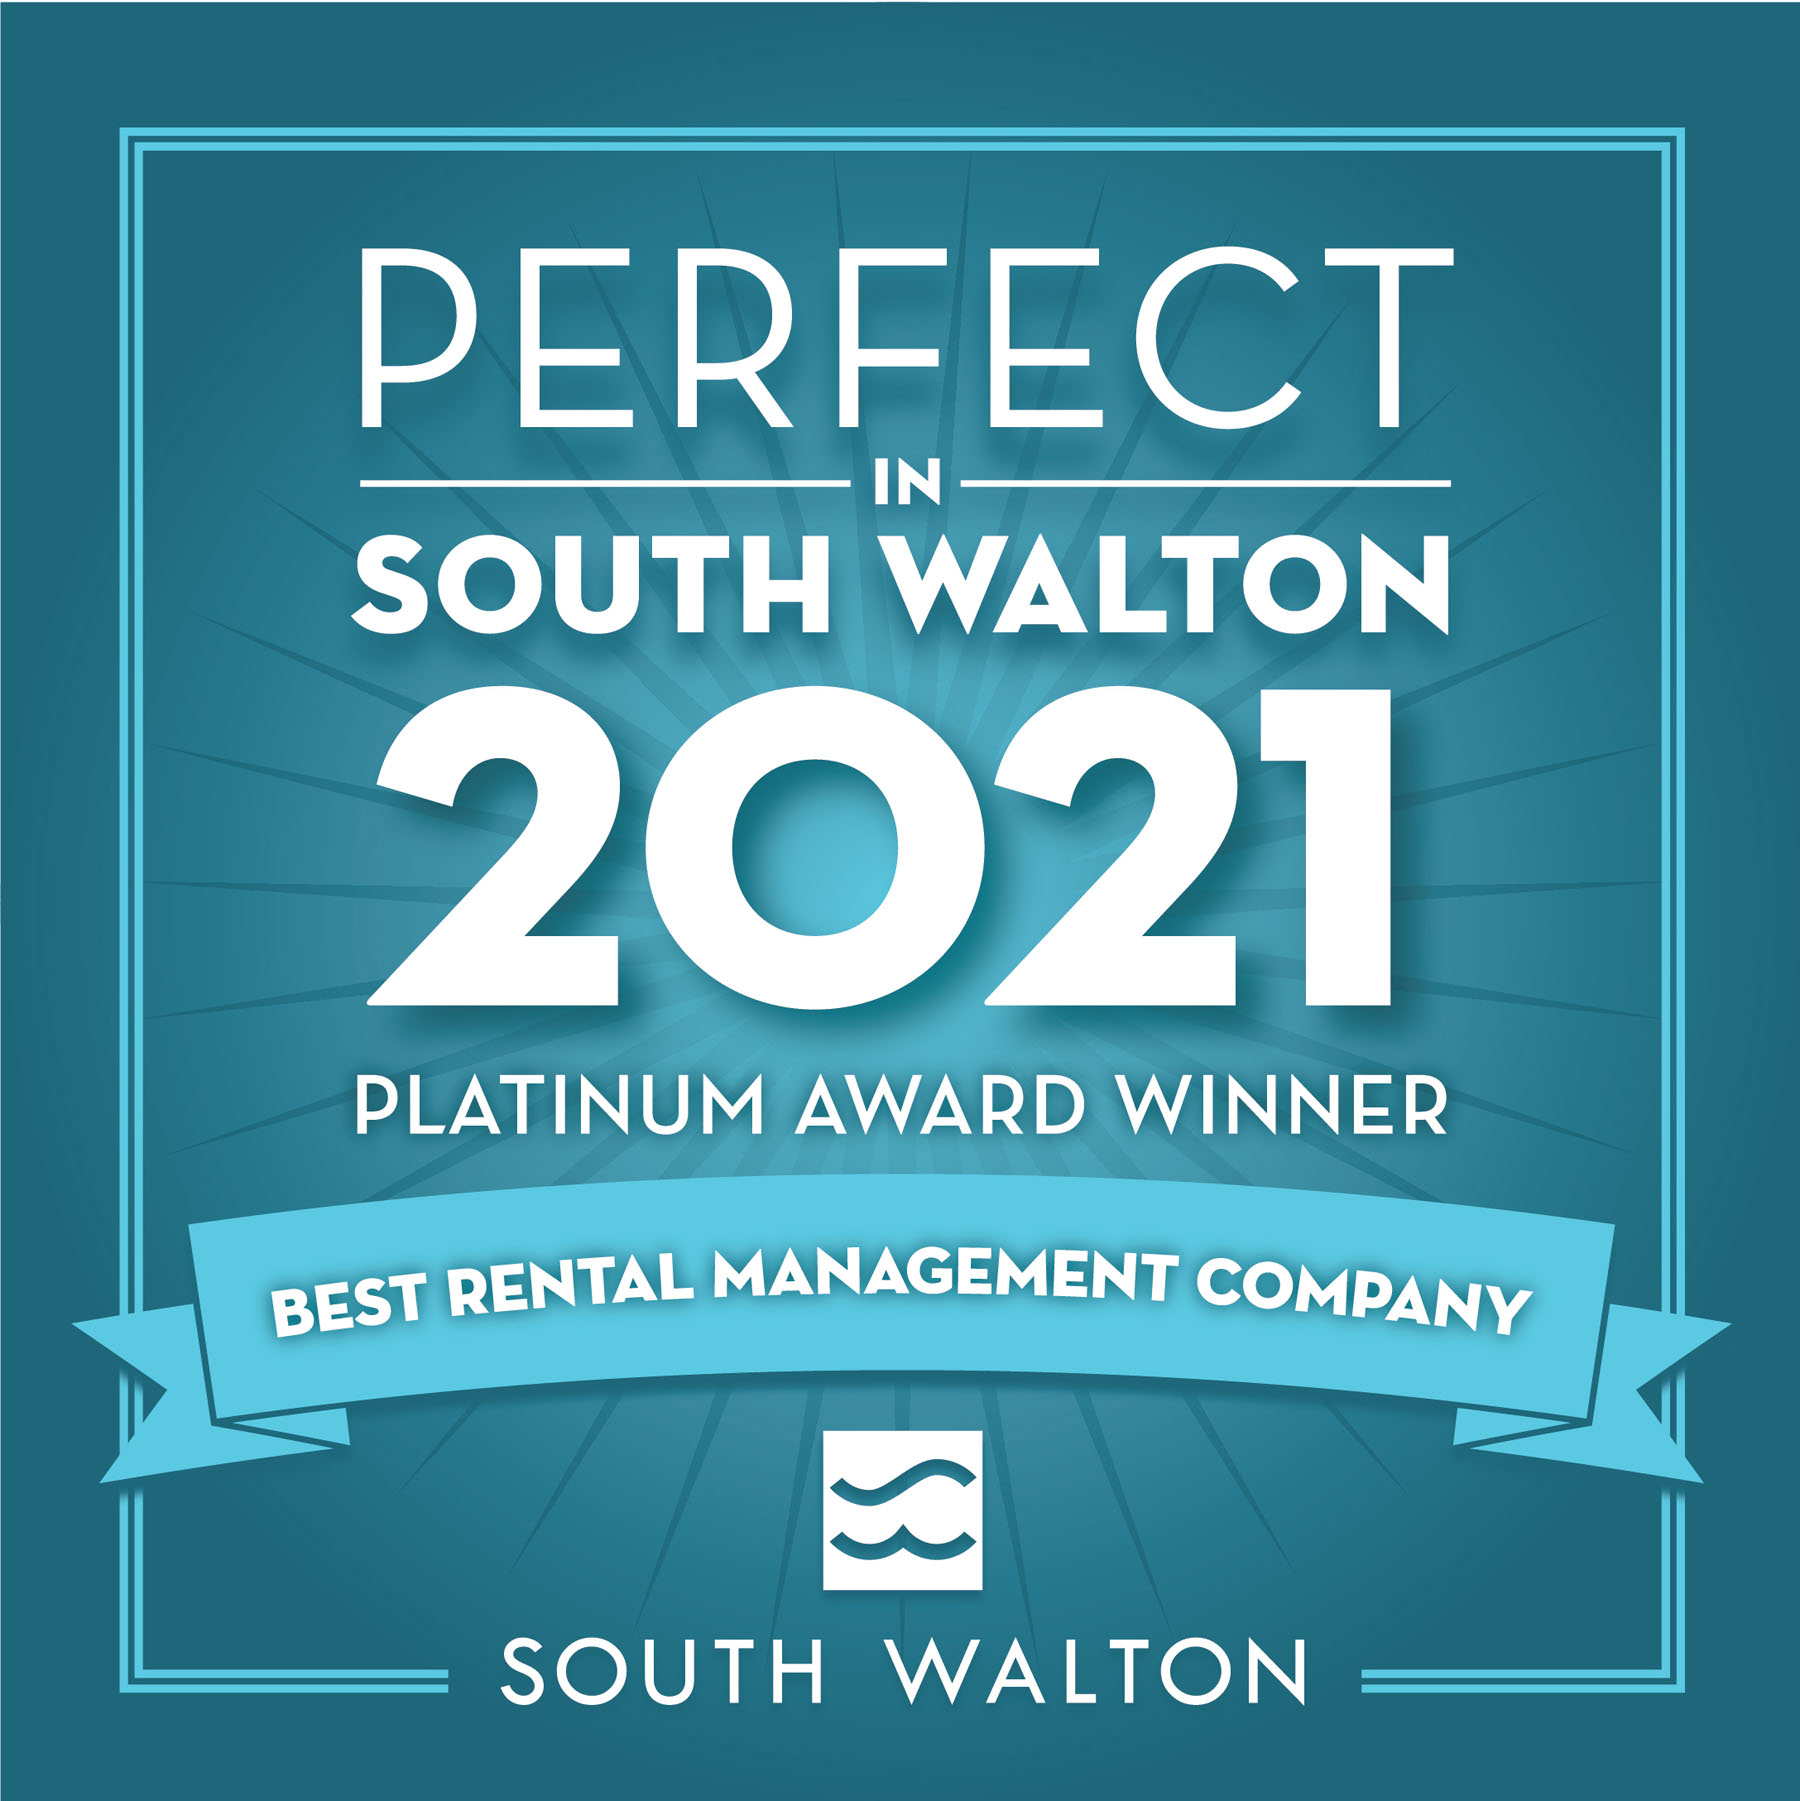 30A Escapes 2021 Perfect In South Walton Platinum Award Winner for Best Rental Management Company